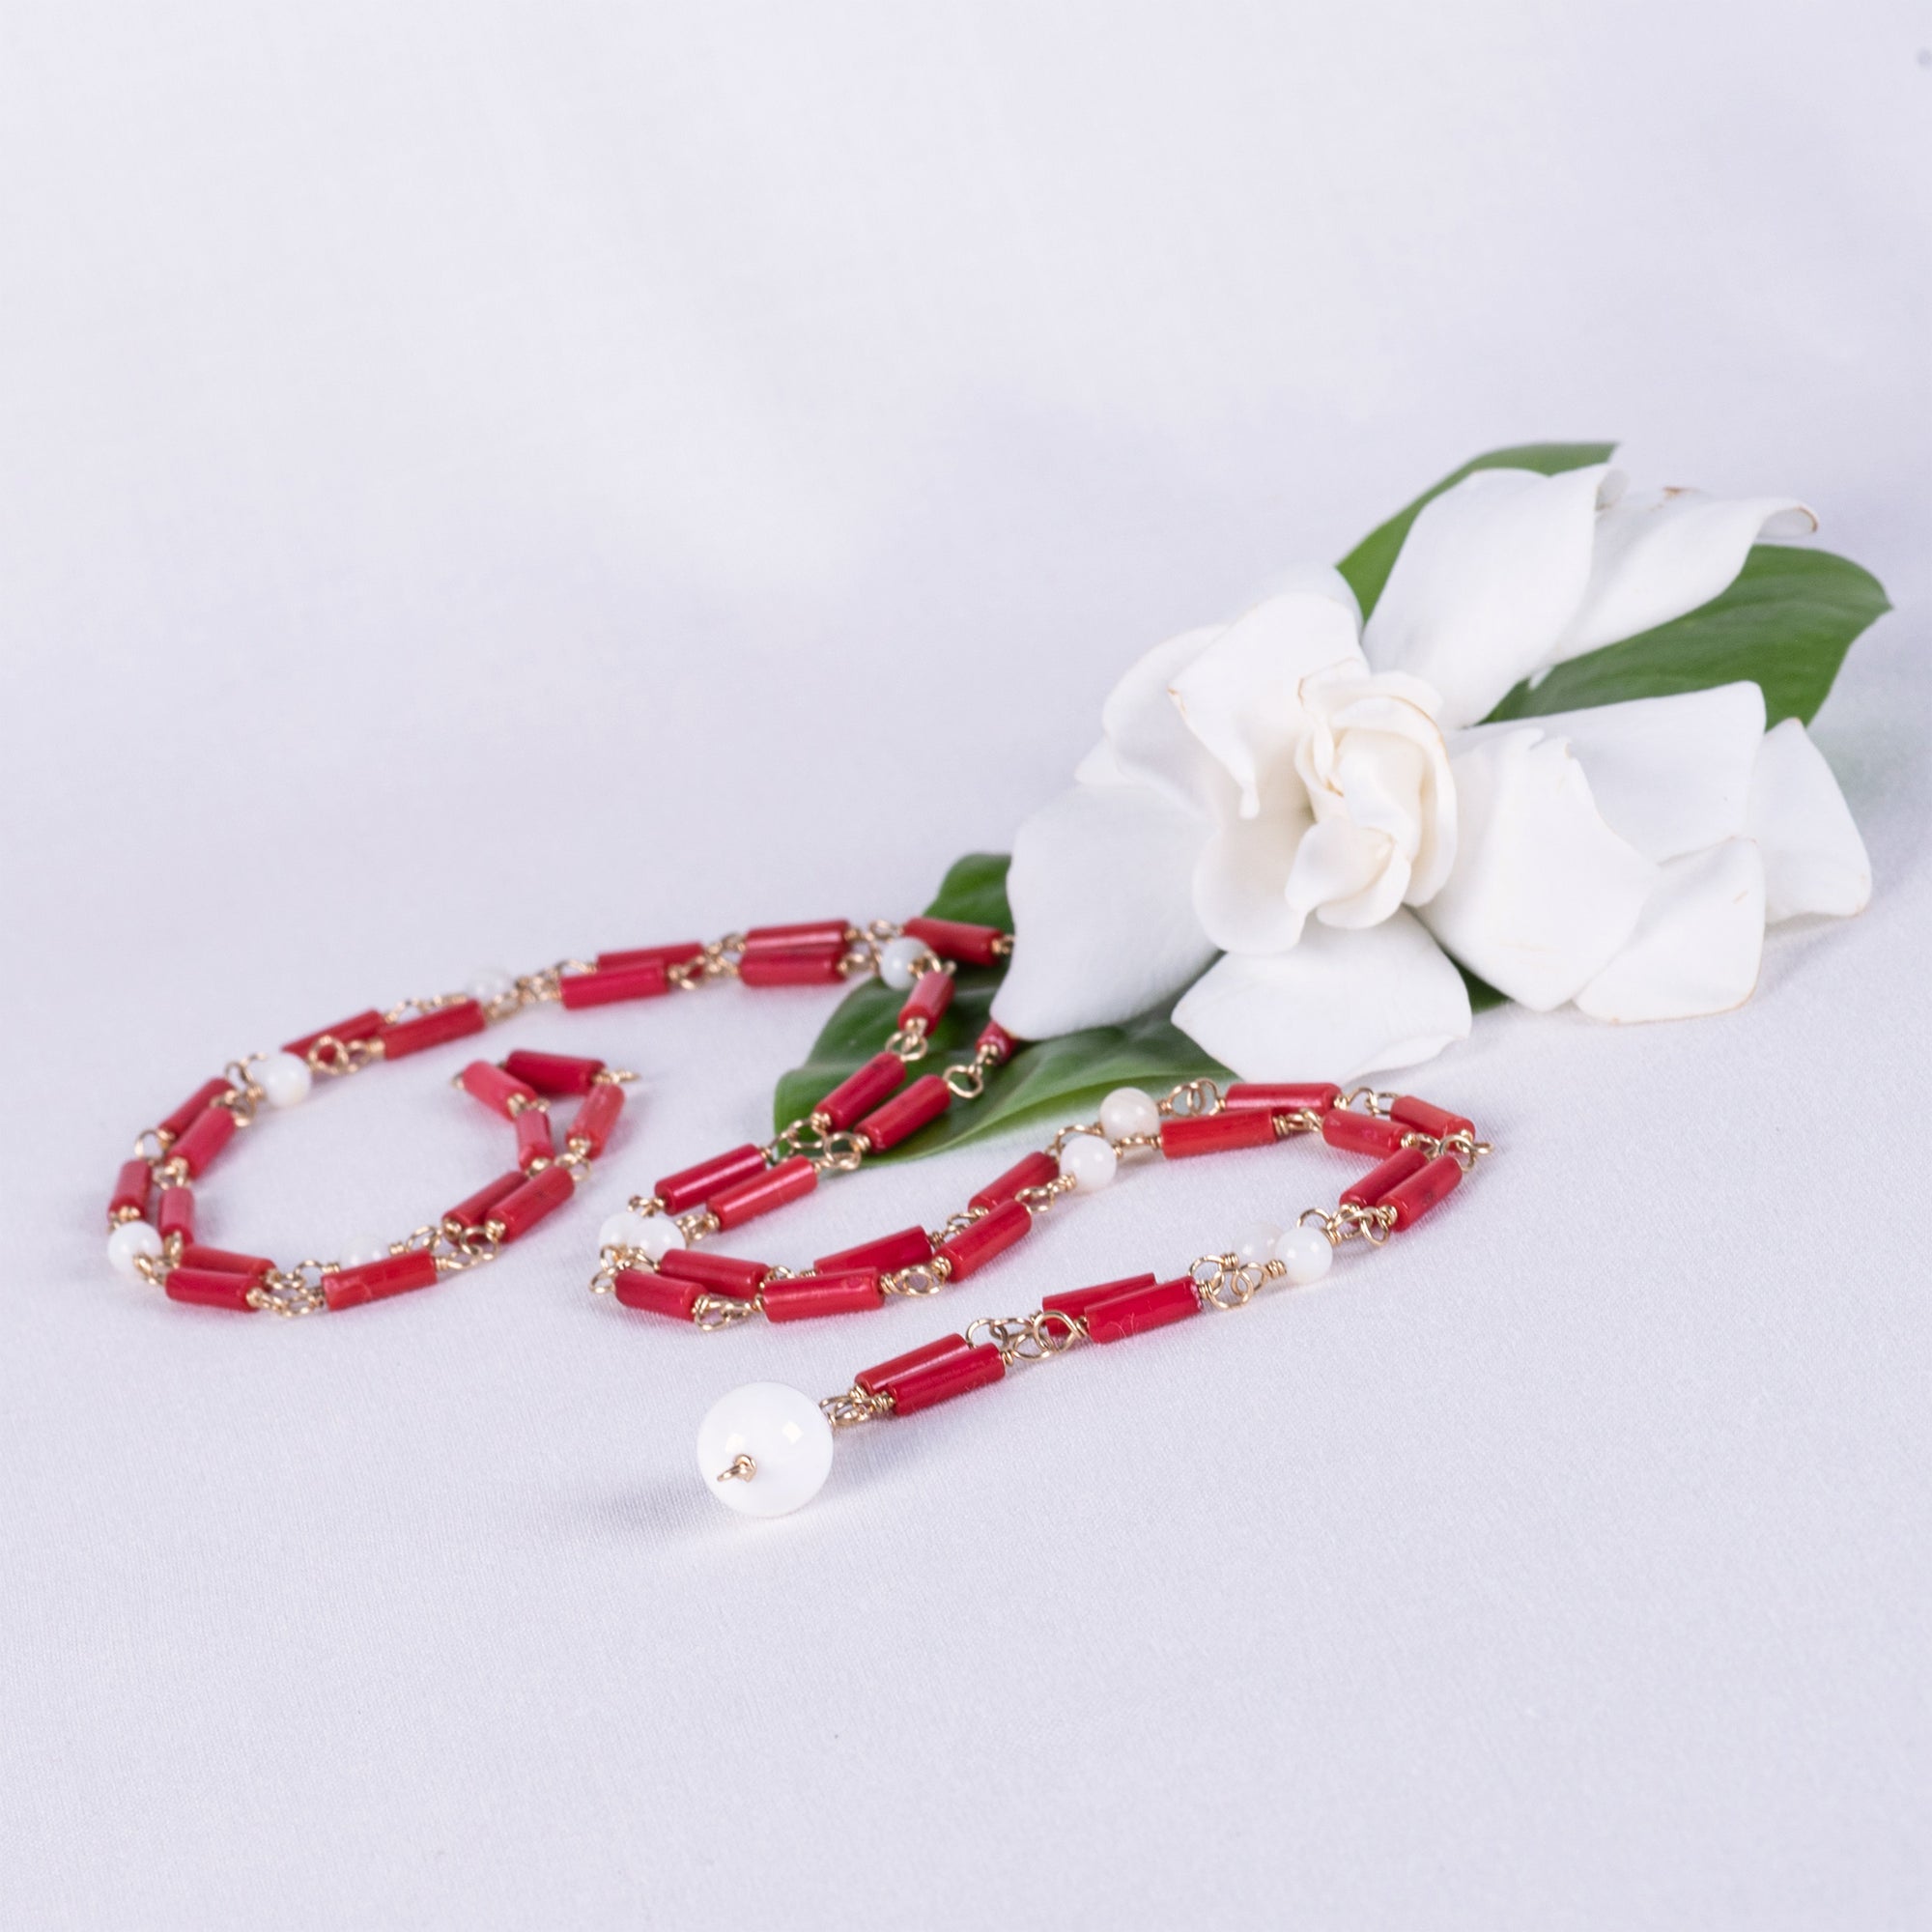 Red Coral & Mother-of-Pearl Necklace (Prasad)